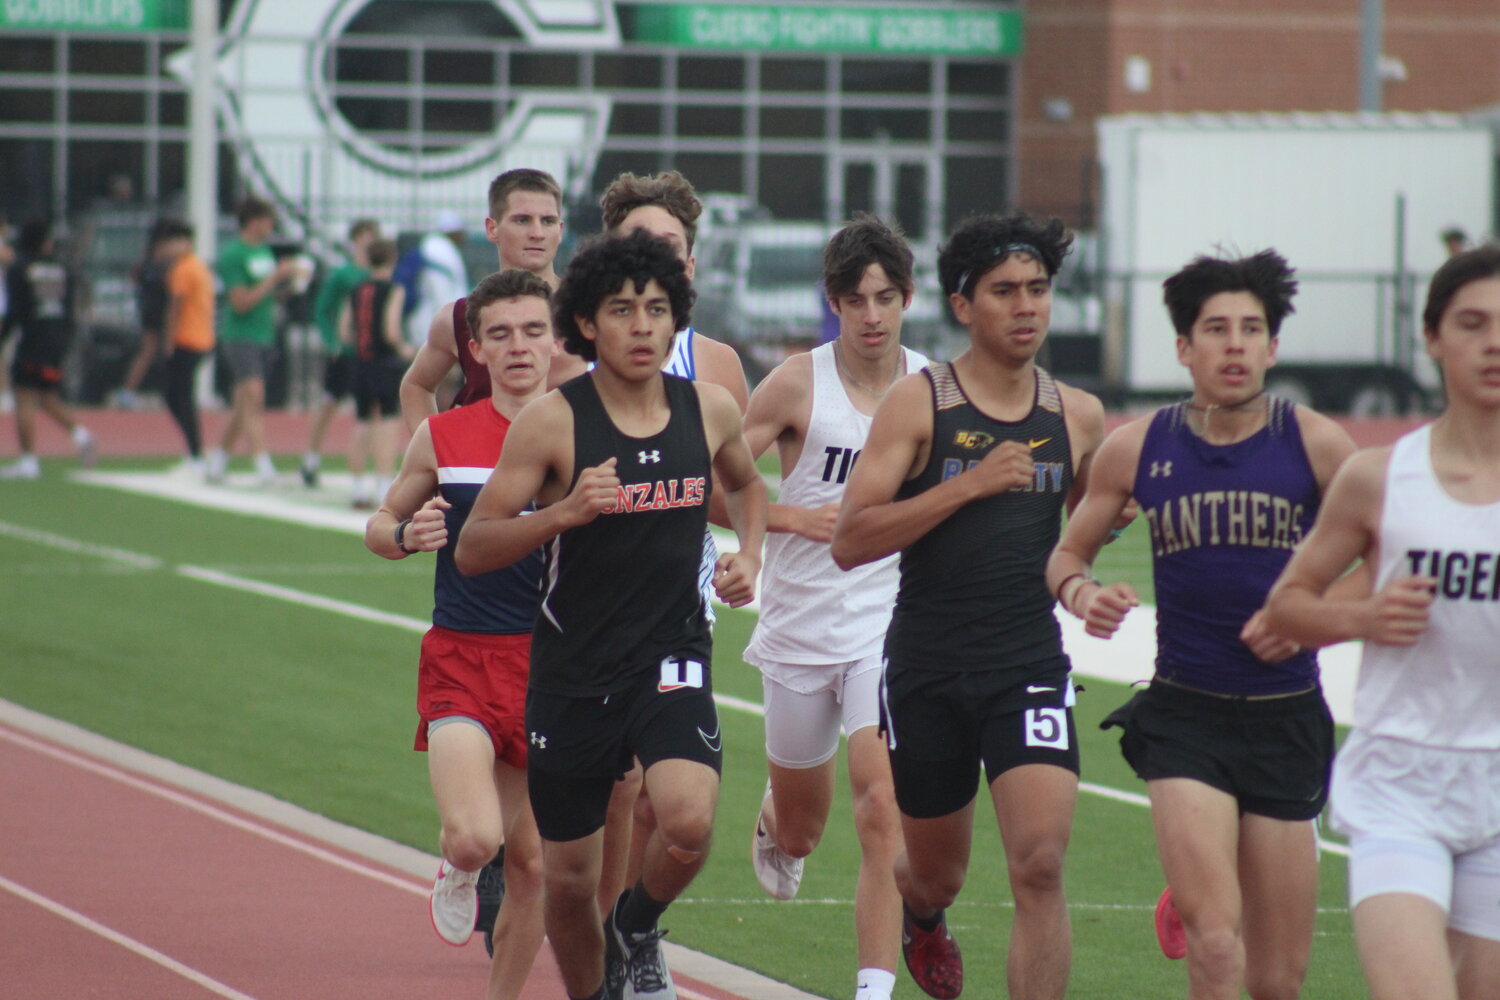 Apaches’ Ckristofer Ramos runs in the 1600m race at the Cuero track meet Thursday, March 7.